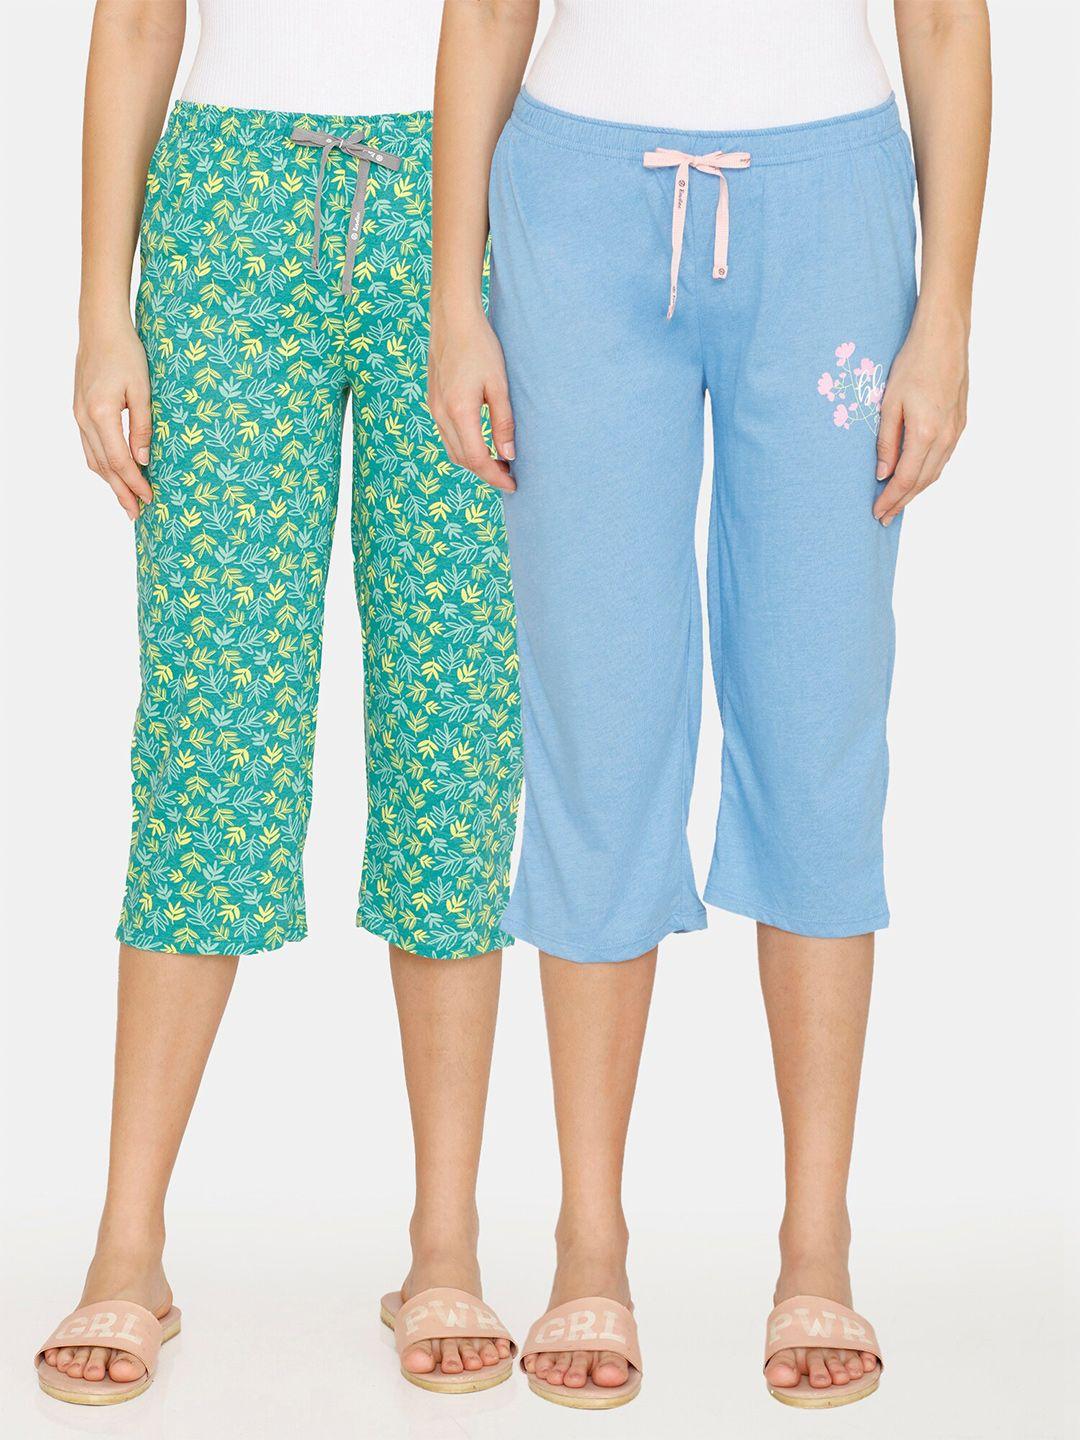 rosaline by zivame women pack of 2 blue & green printed pure cotton capris